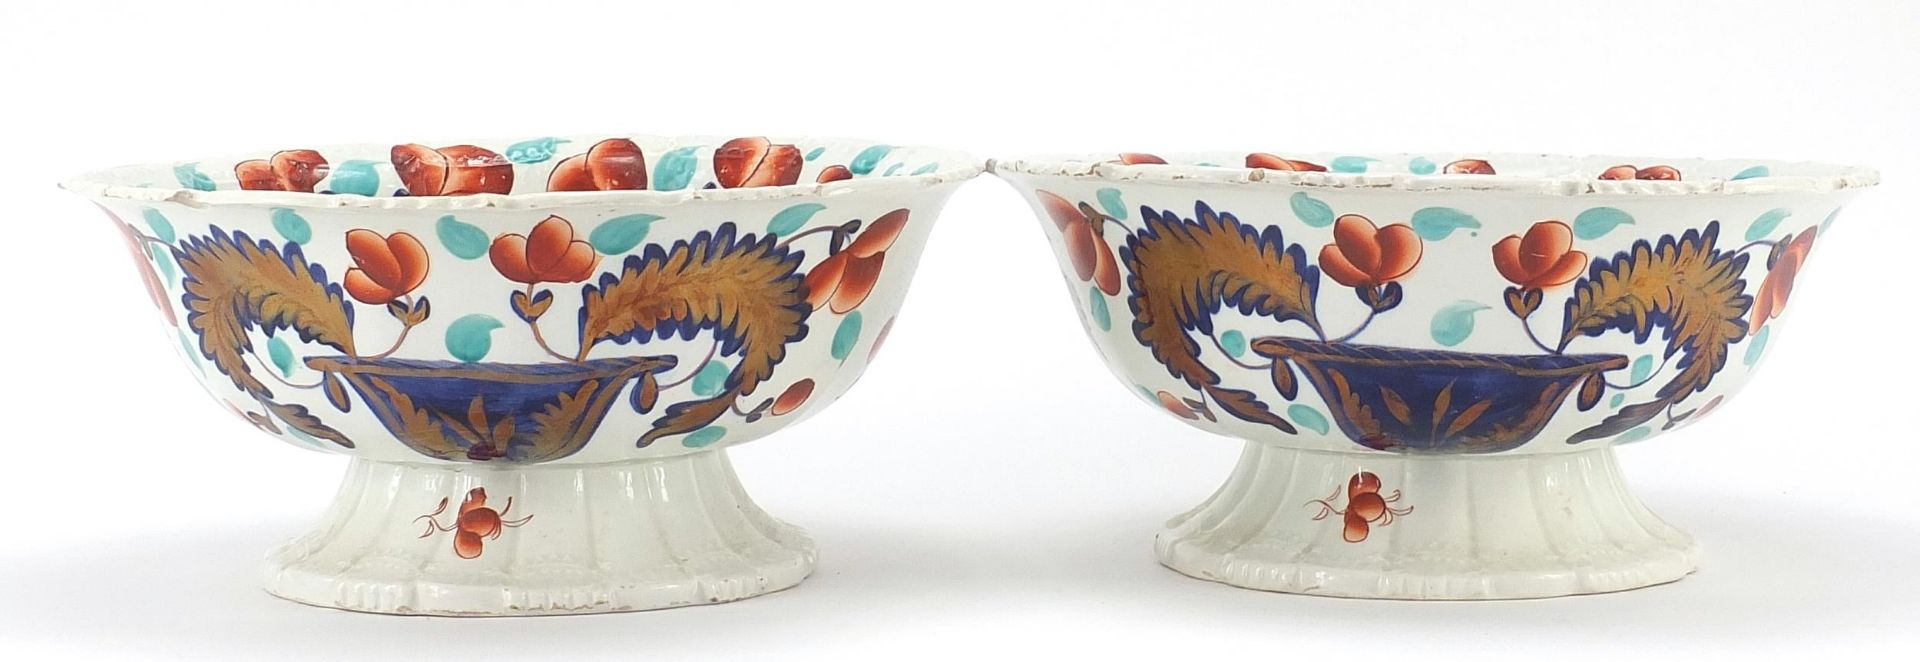 Pair of Victorian ironstone centre bowls decorated with flowers and foliage, each 29cm in diameter - Image 2 of 4